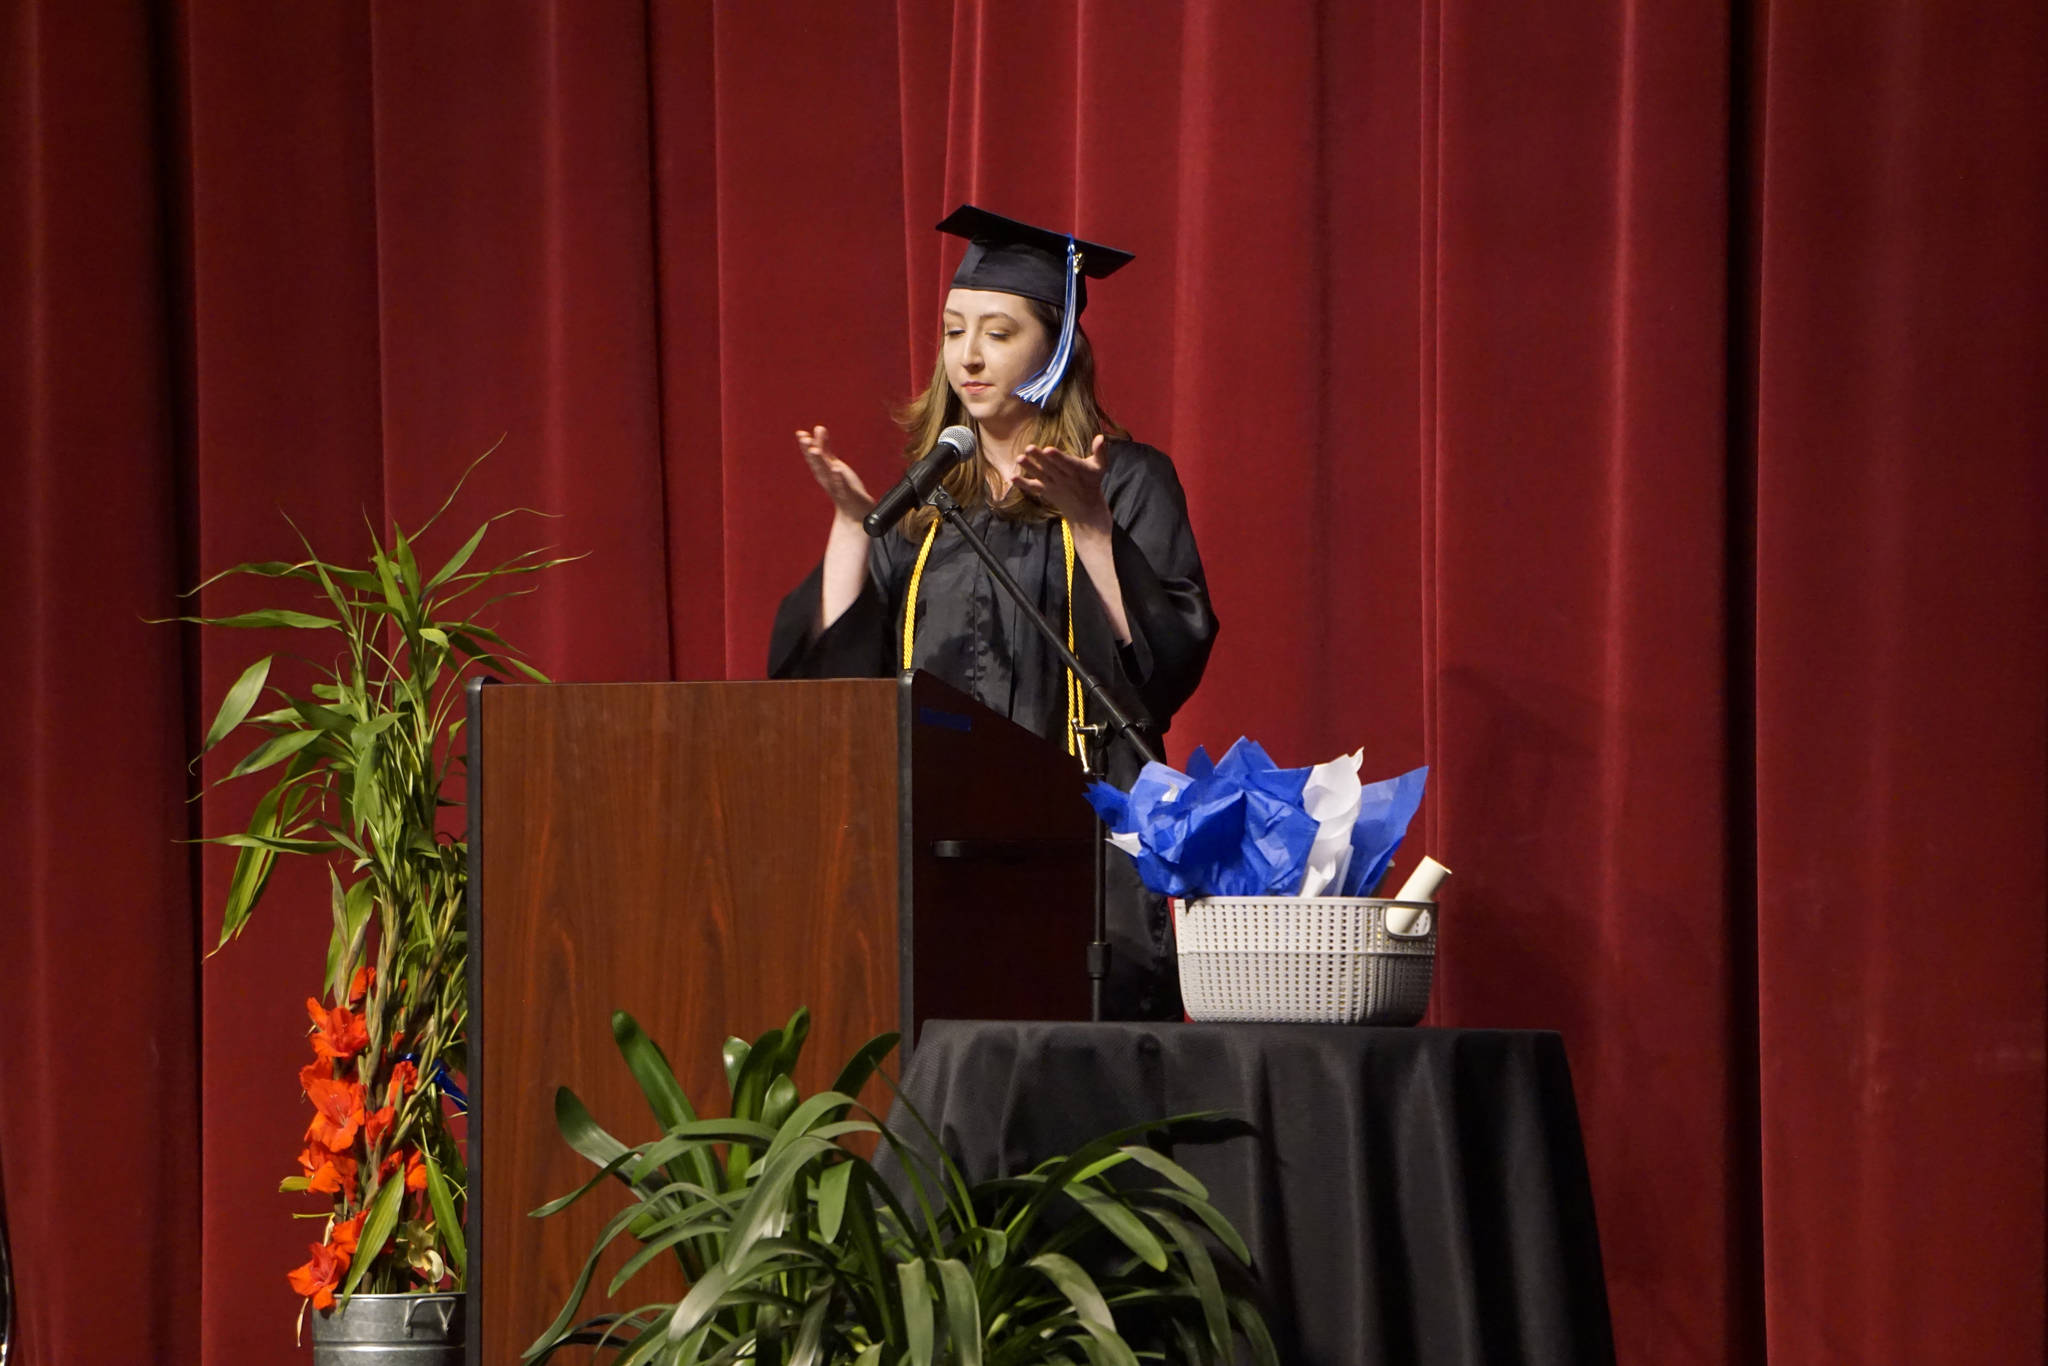 Valedictorian Abgail Ensign speaks at the Kachemak Bay Campus commencement last Wednesday, May 8, 2019, at the Mariner Theatre in Homer, Alaska. Ensign received an associate of arts degree from KBC. (Photo by Michael Armstrong/Homer News.)